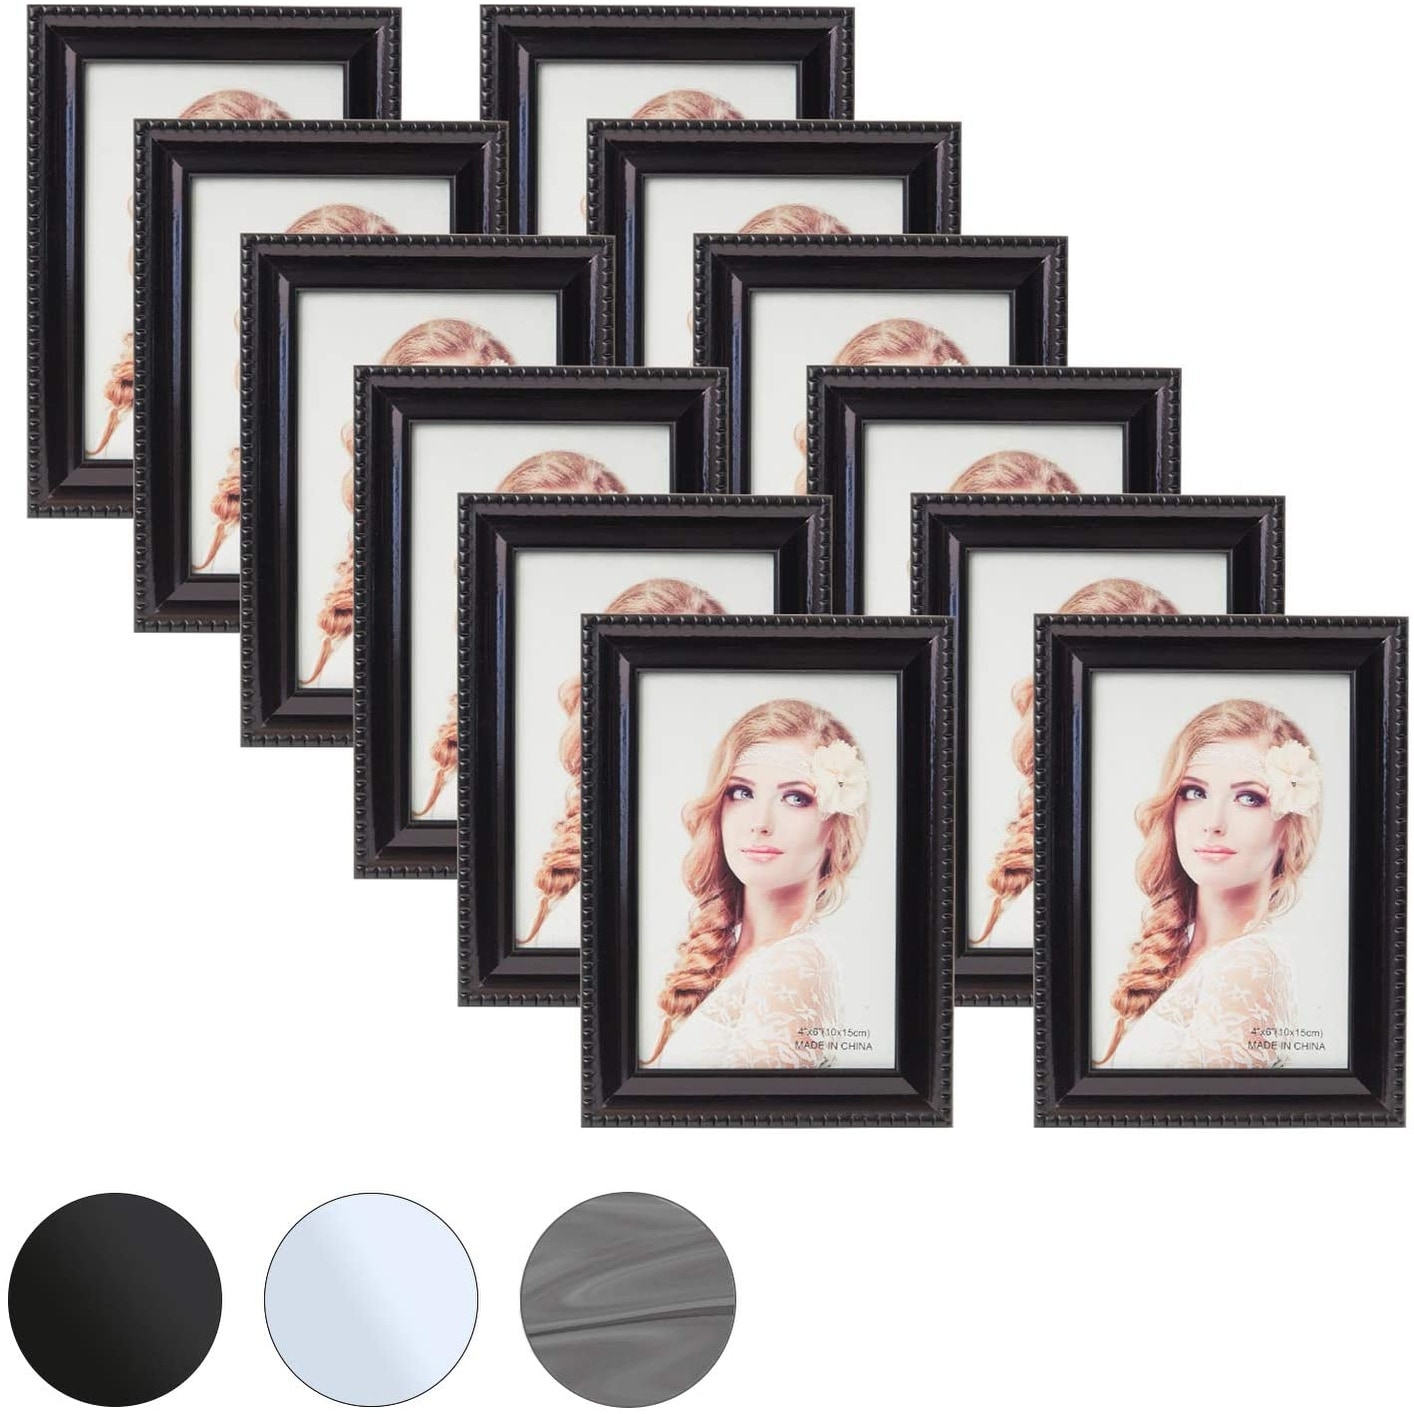 https://ak1.ostkcdn.com/images/products/is/images/direct/ec095deeea45c087e9fff91b78f36aa984ad364b/Houseables-Picture-Frame-Set%2C-12-Pack%2C-Black%2C-4x6-Inches.jpg